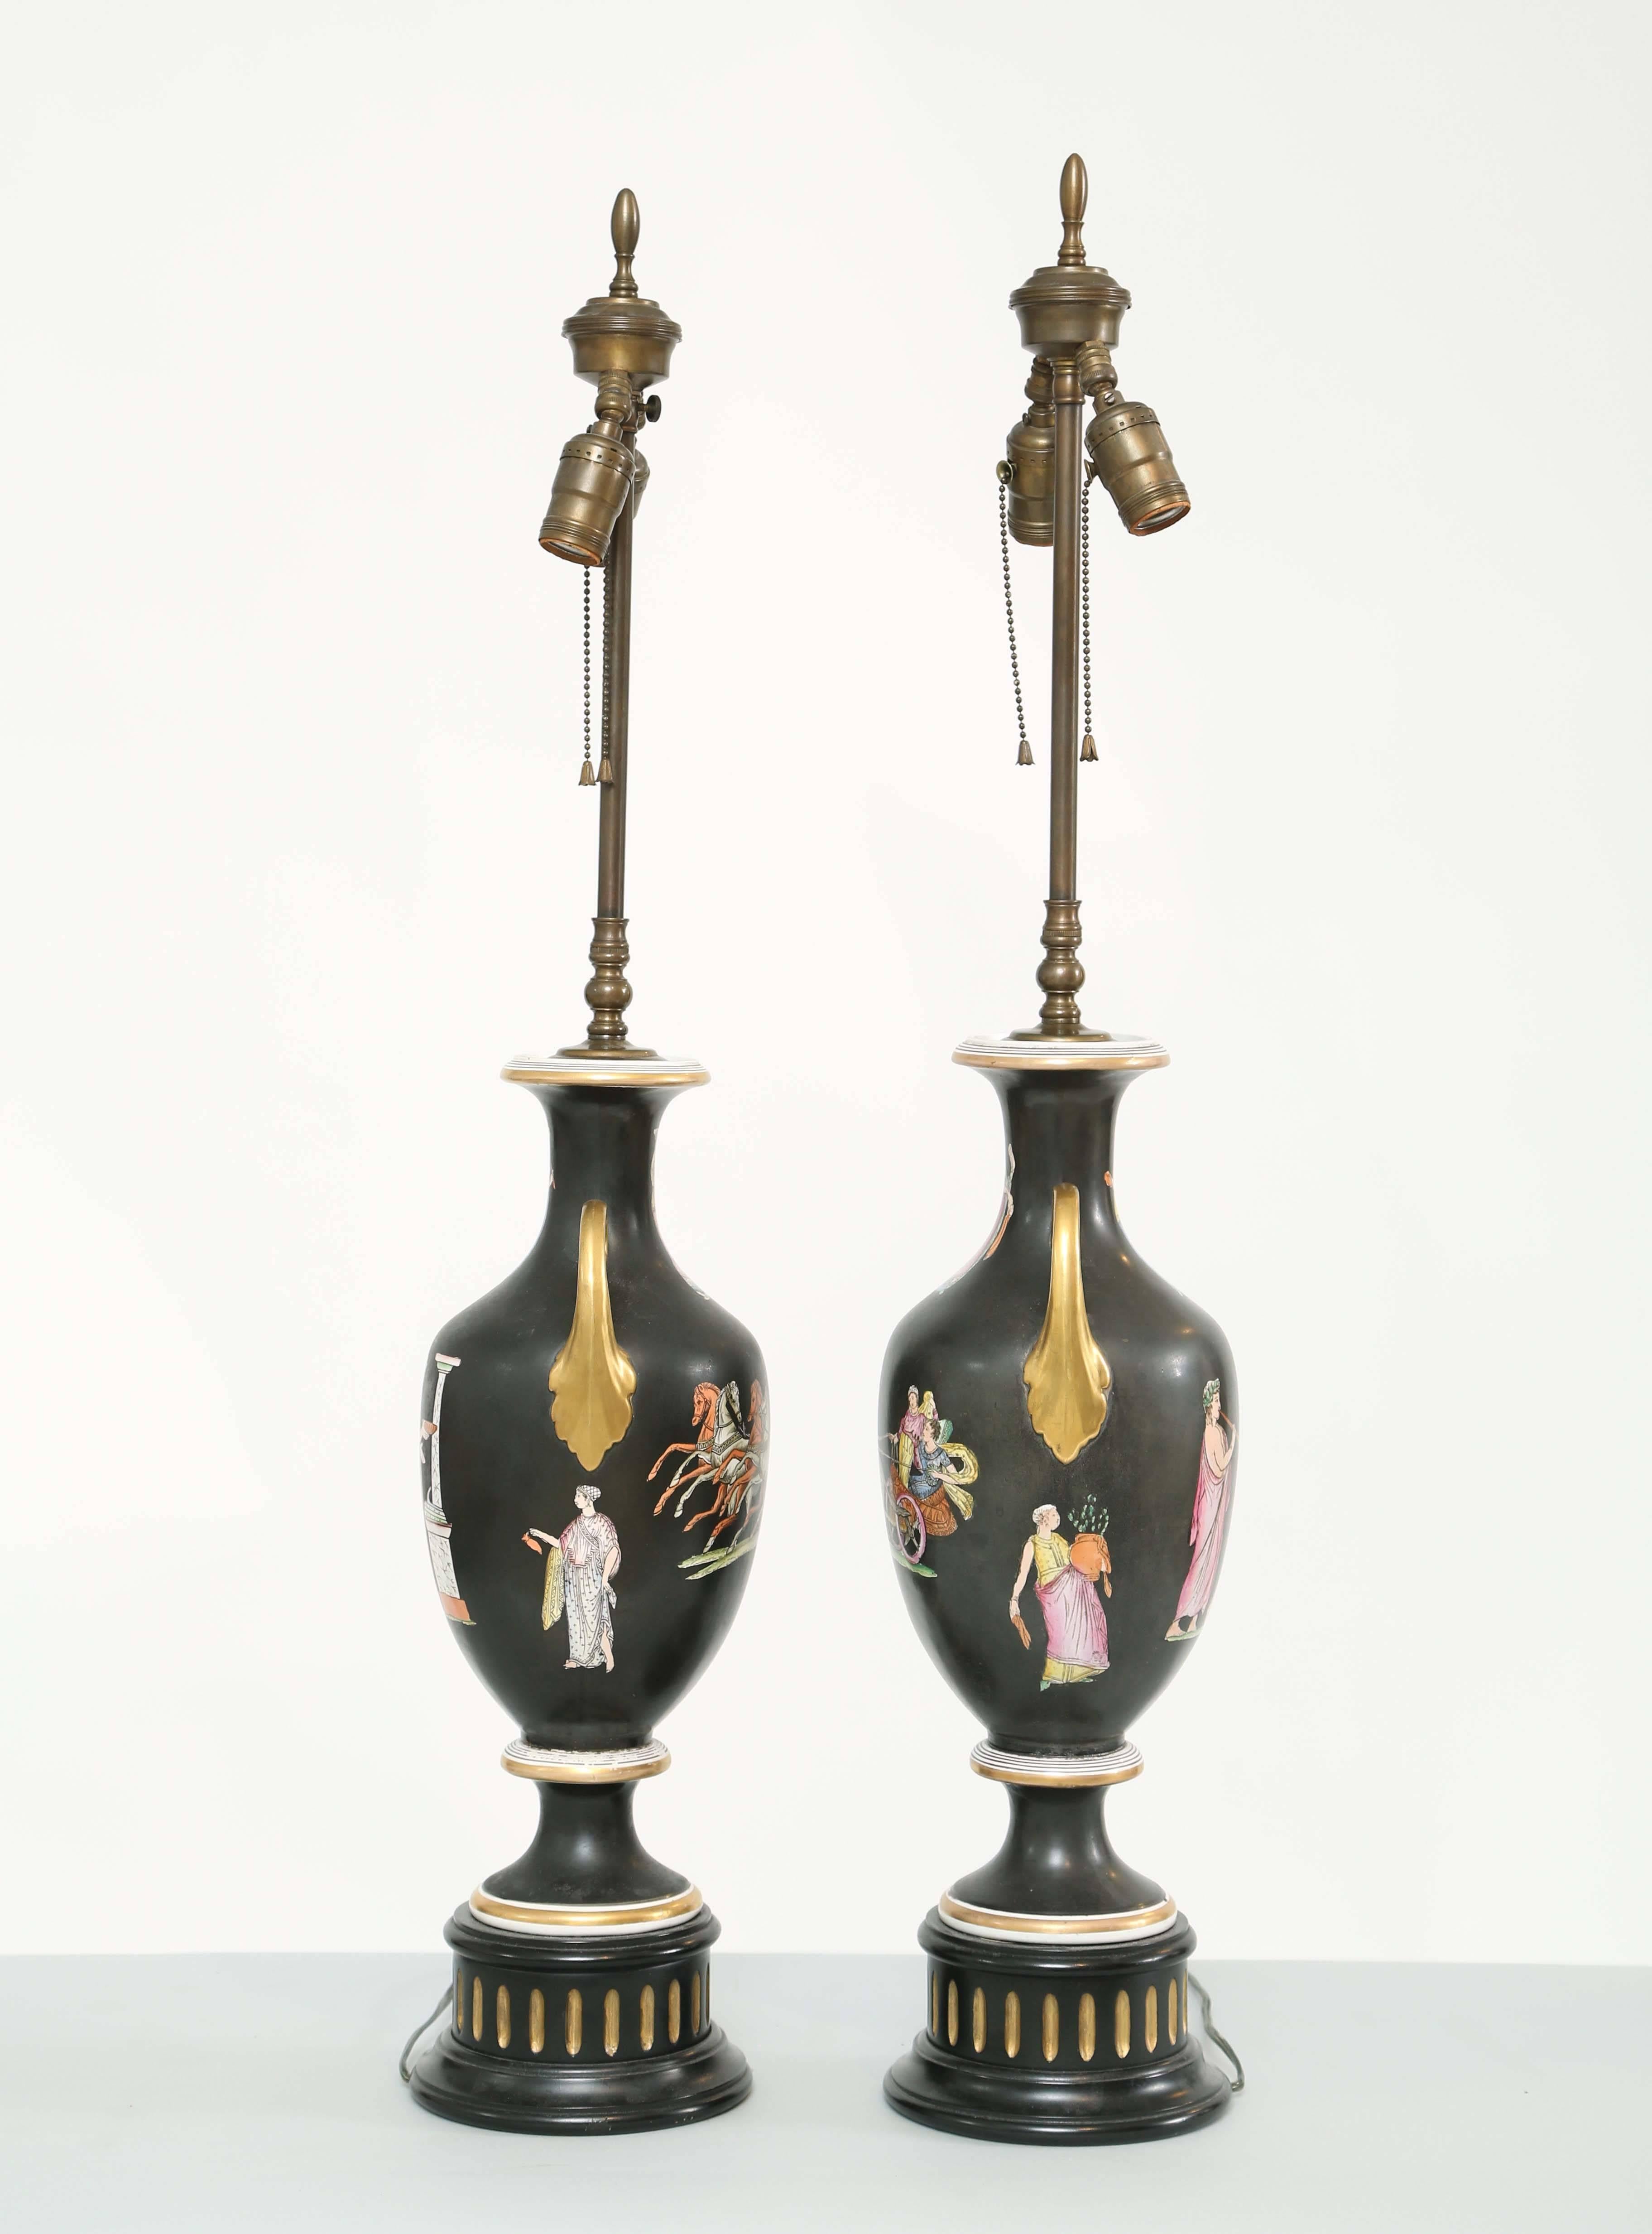 Pair of black Amphora urn-form porcelain vases, each with colorful transfer decoration of Charioteers and Classical figural motifs, having a flared neck flanked by gilded handles, raised on round foot and fluted plinth.